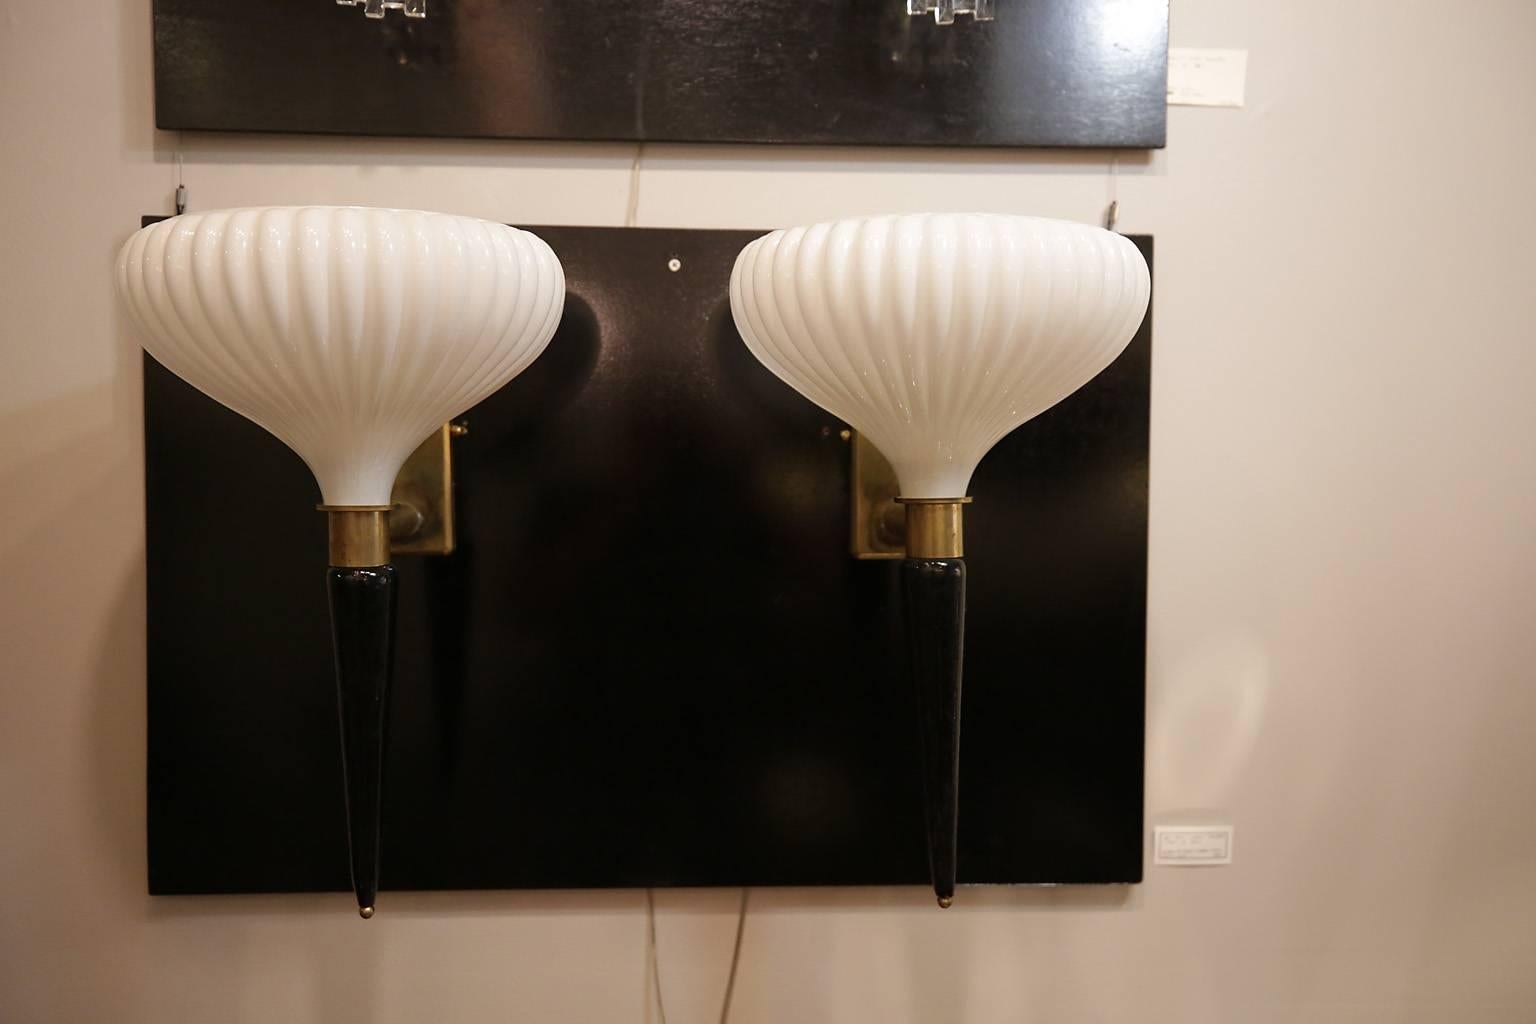 Pair of Art Deco Murano black and white glass sconces with bronze hardware.